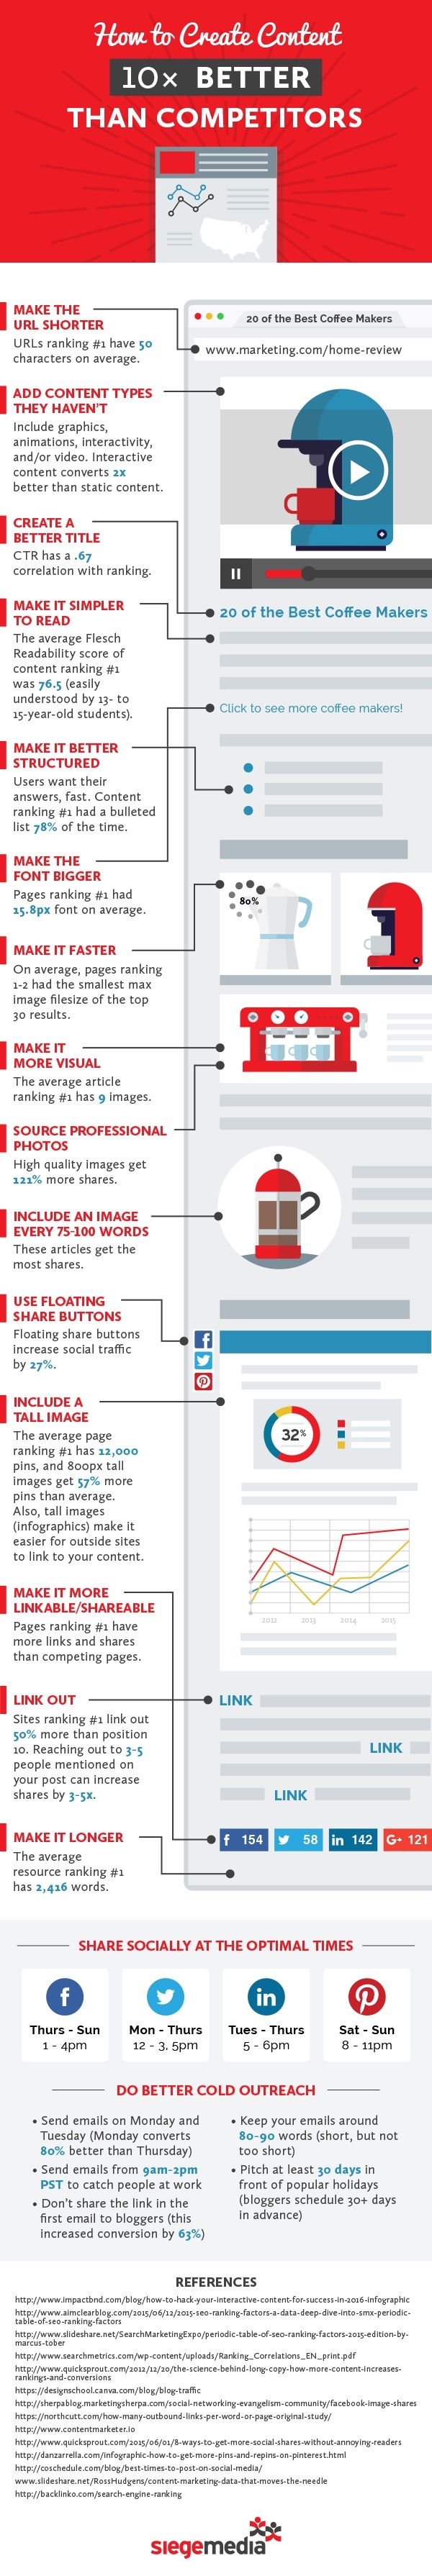 how-to-create-content-10x-better-than-the-competitors-infographic